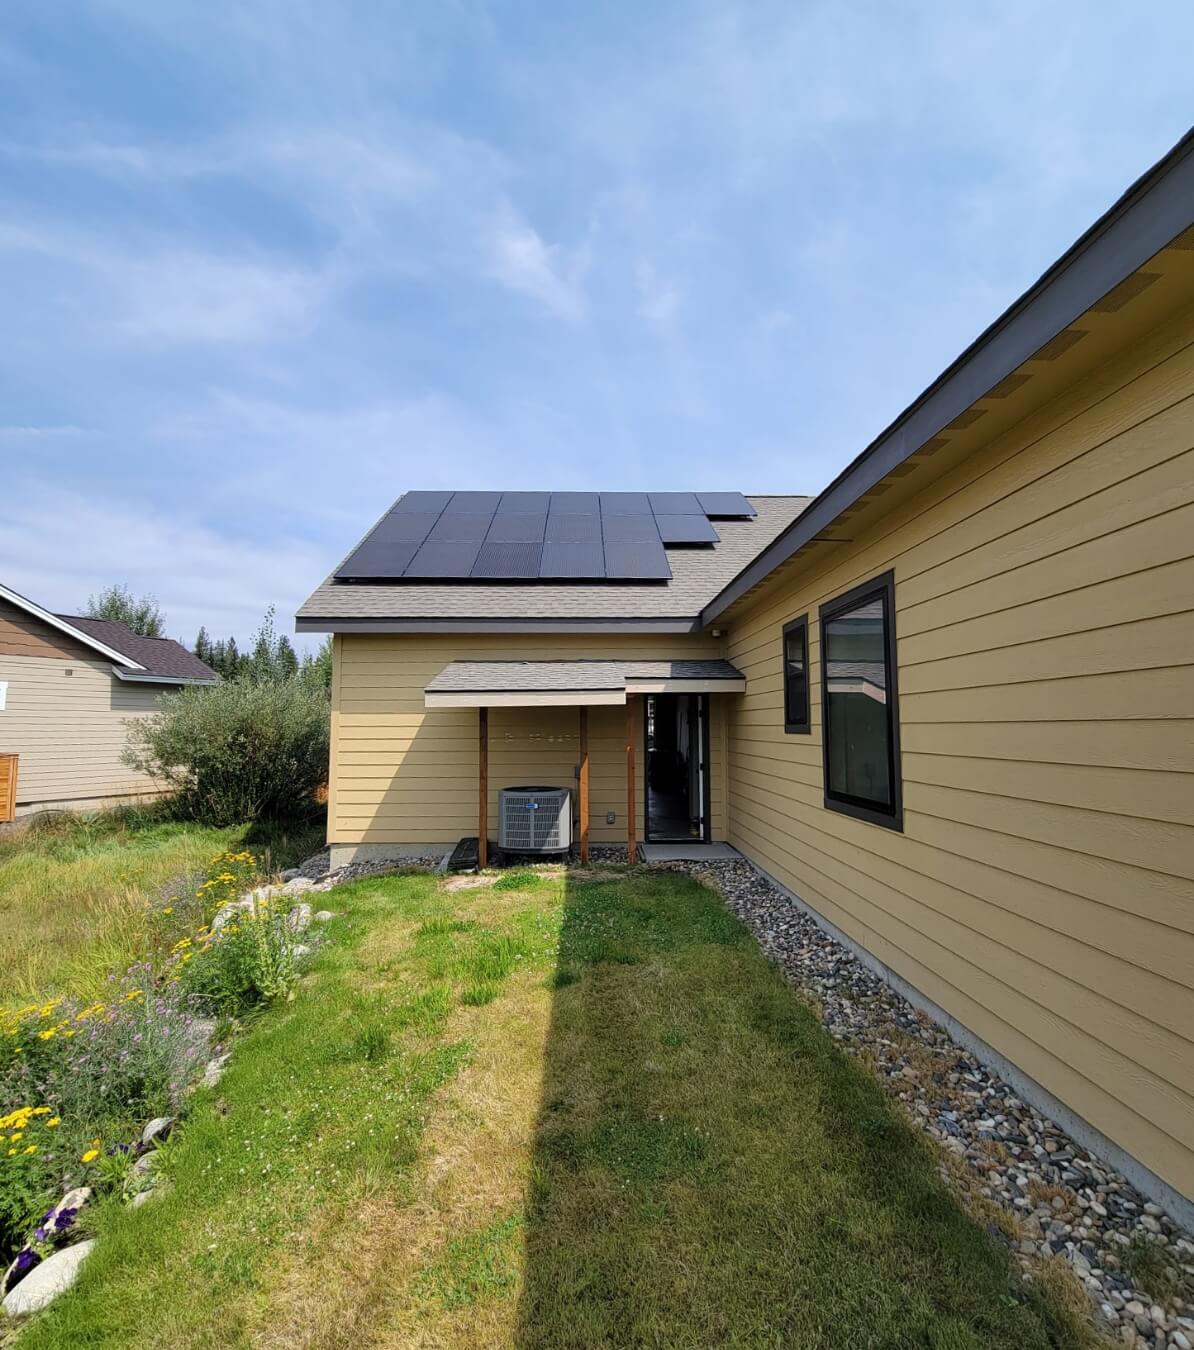 Side view of a house with solar panels.